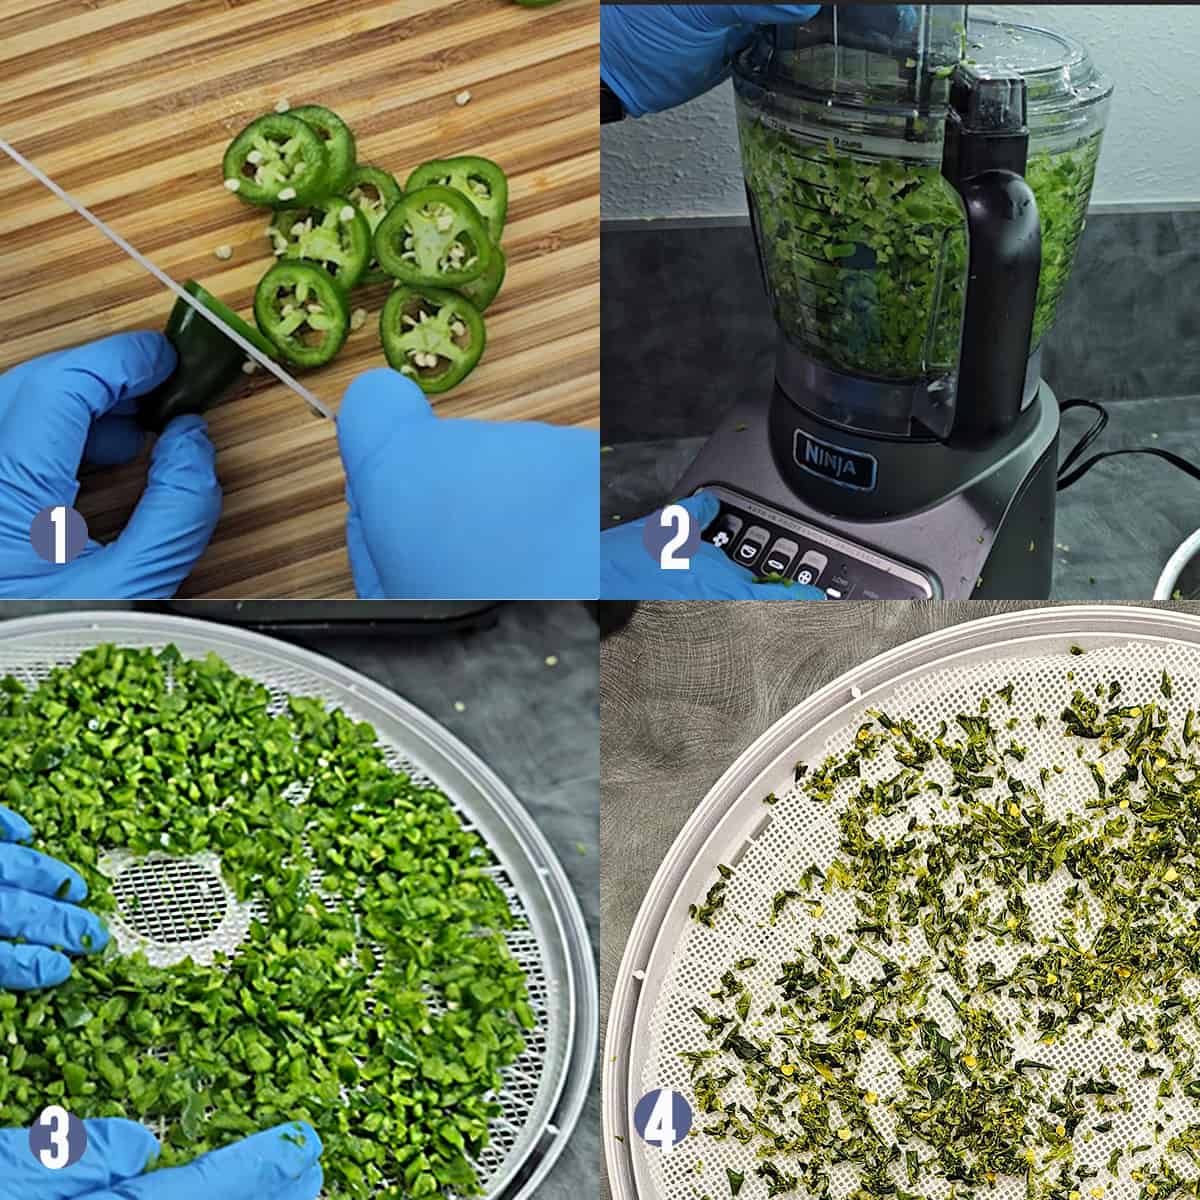 Step by Step process of cutting, dicing and drying jalapenos.